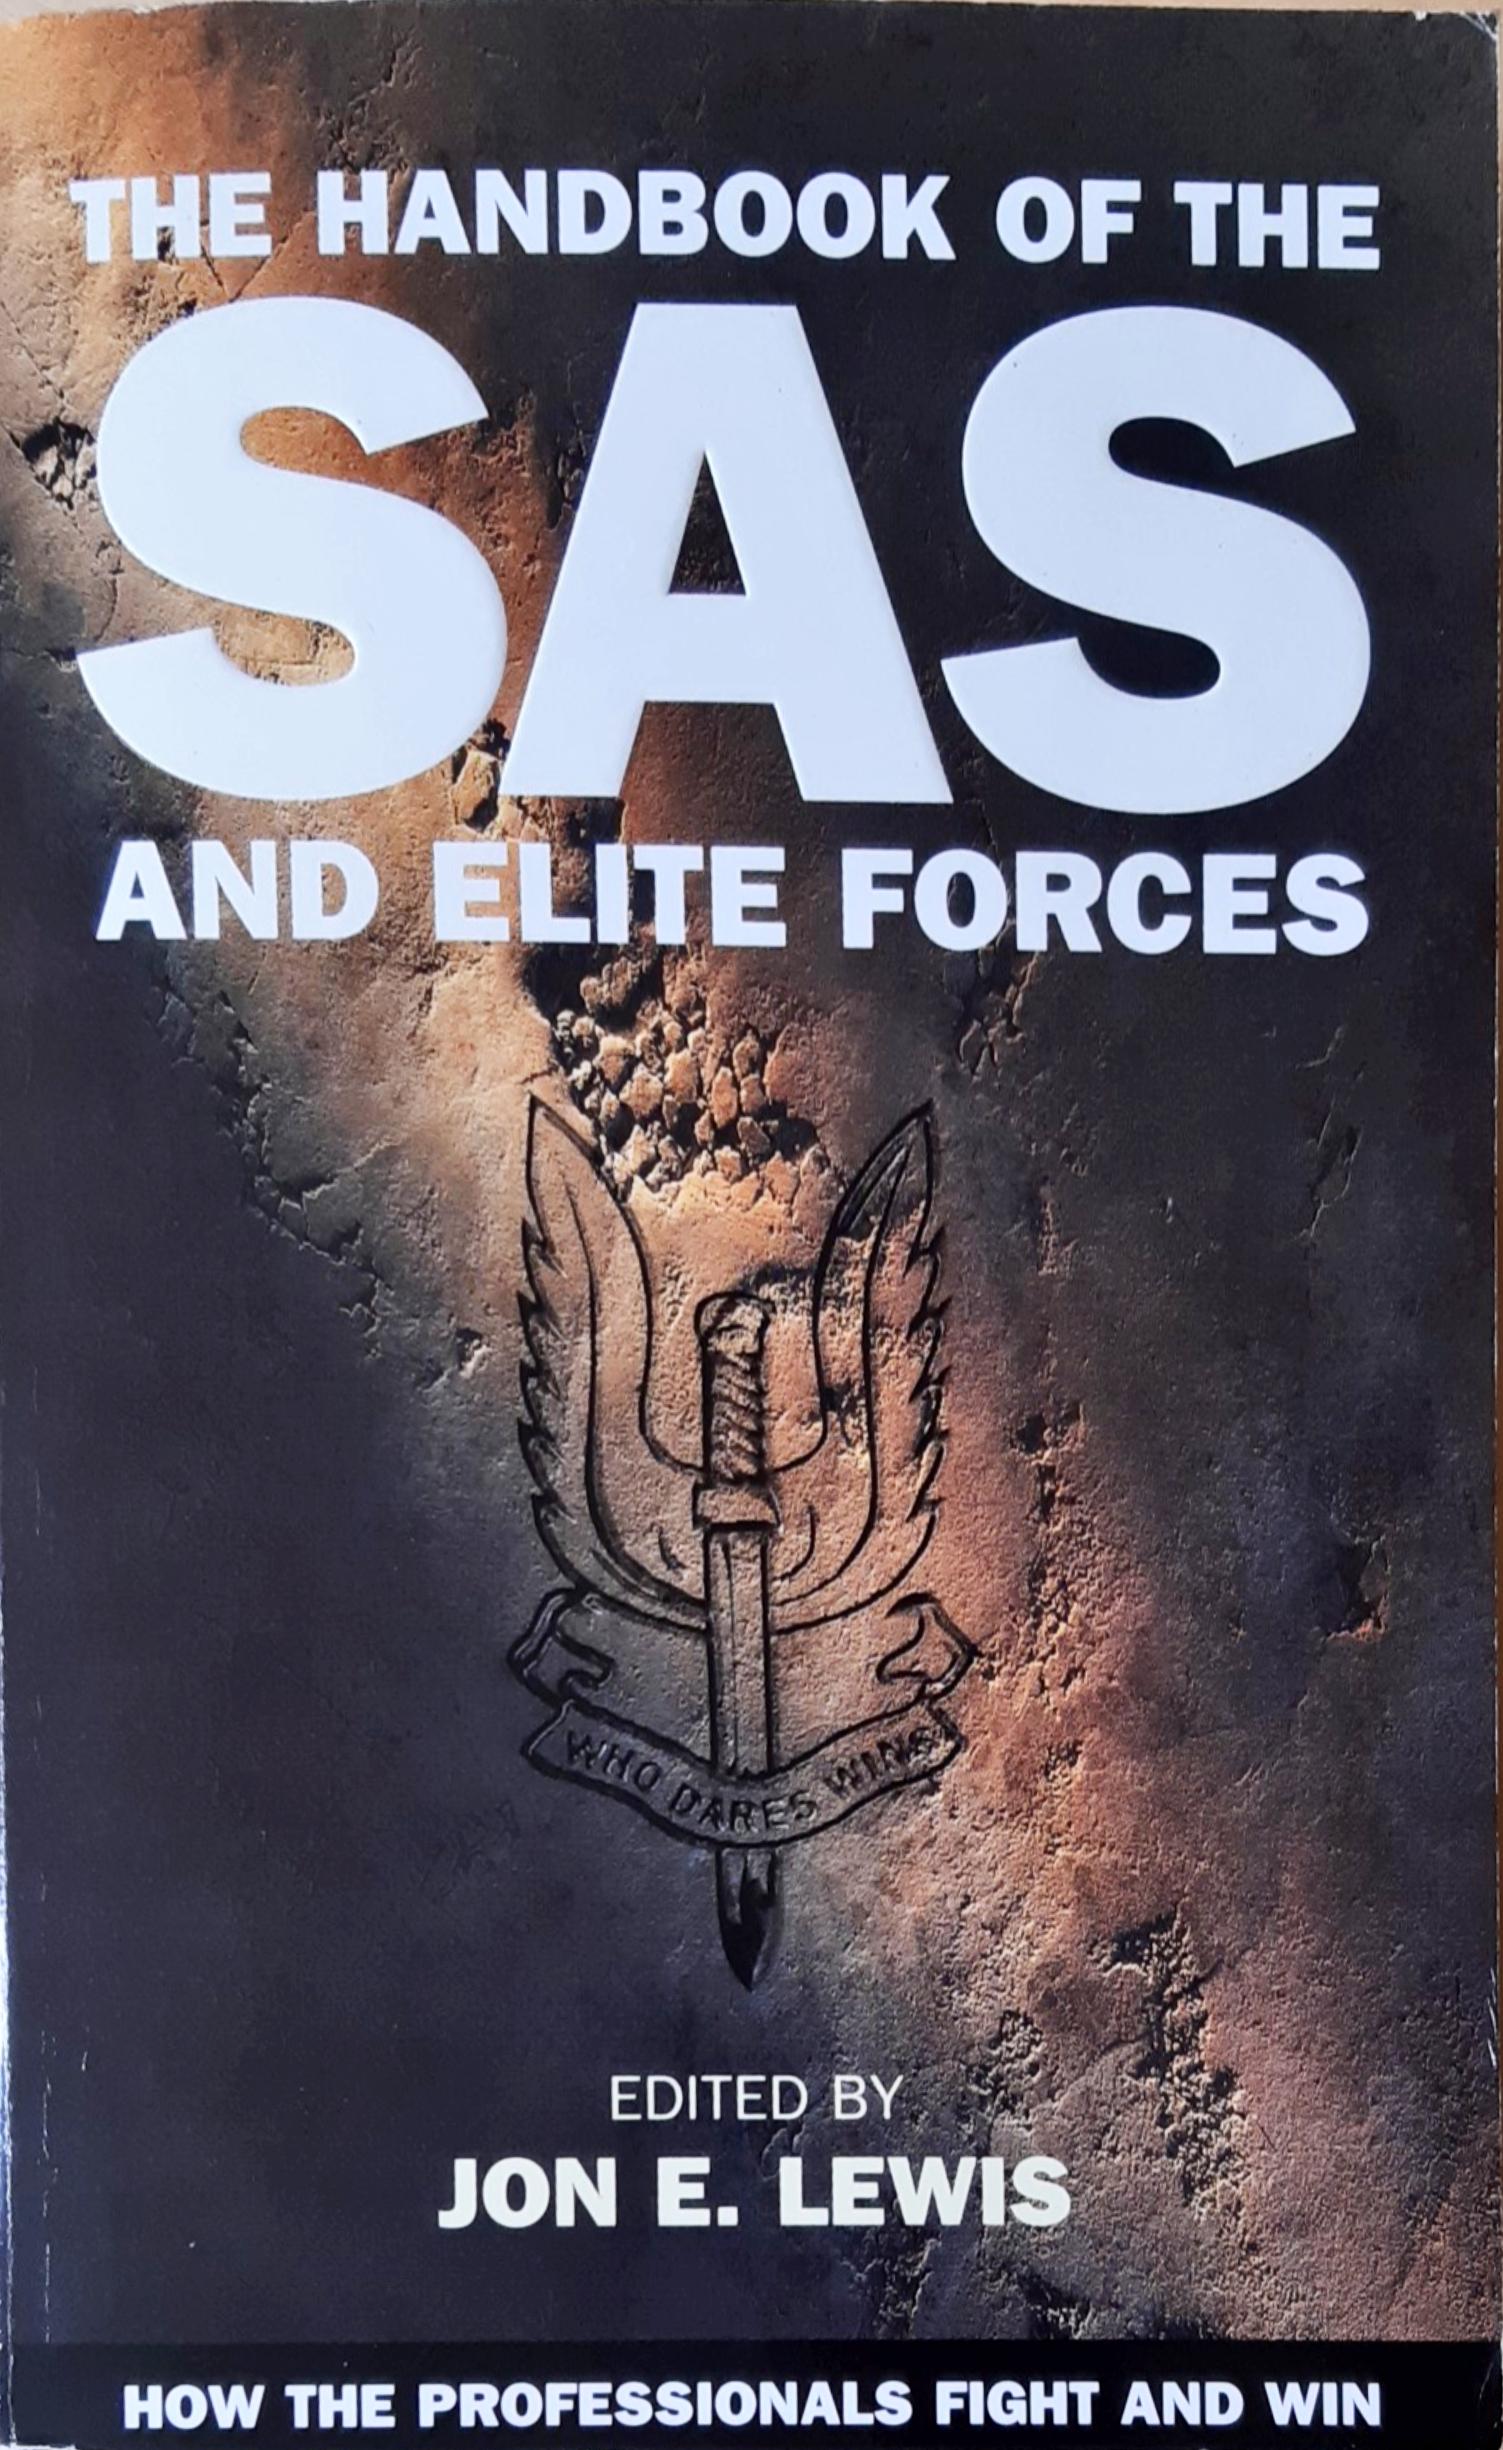 The Handbook Of The Sas And Elite Forces